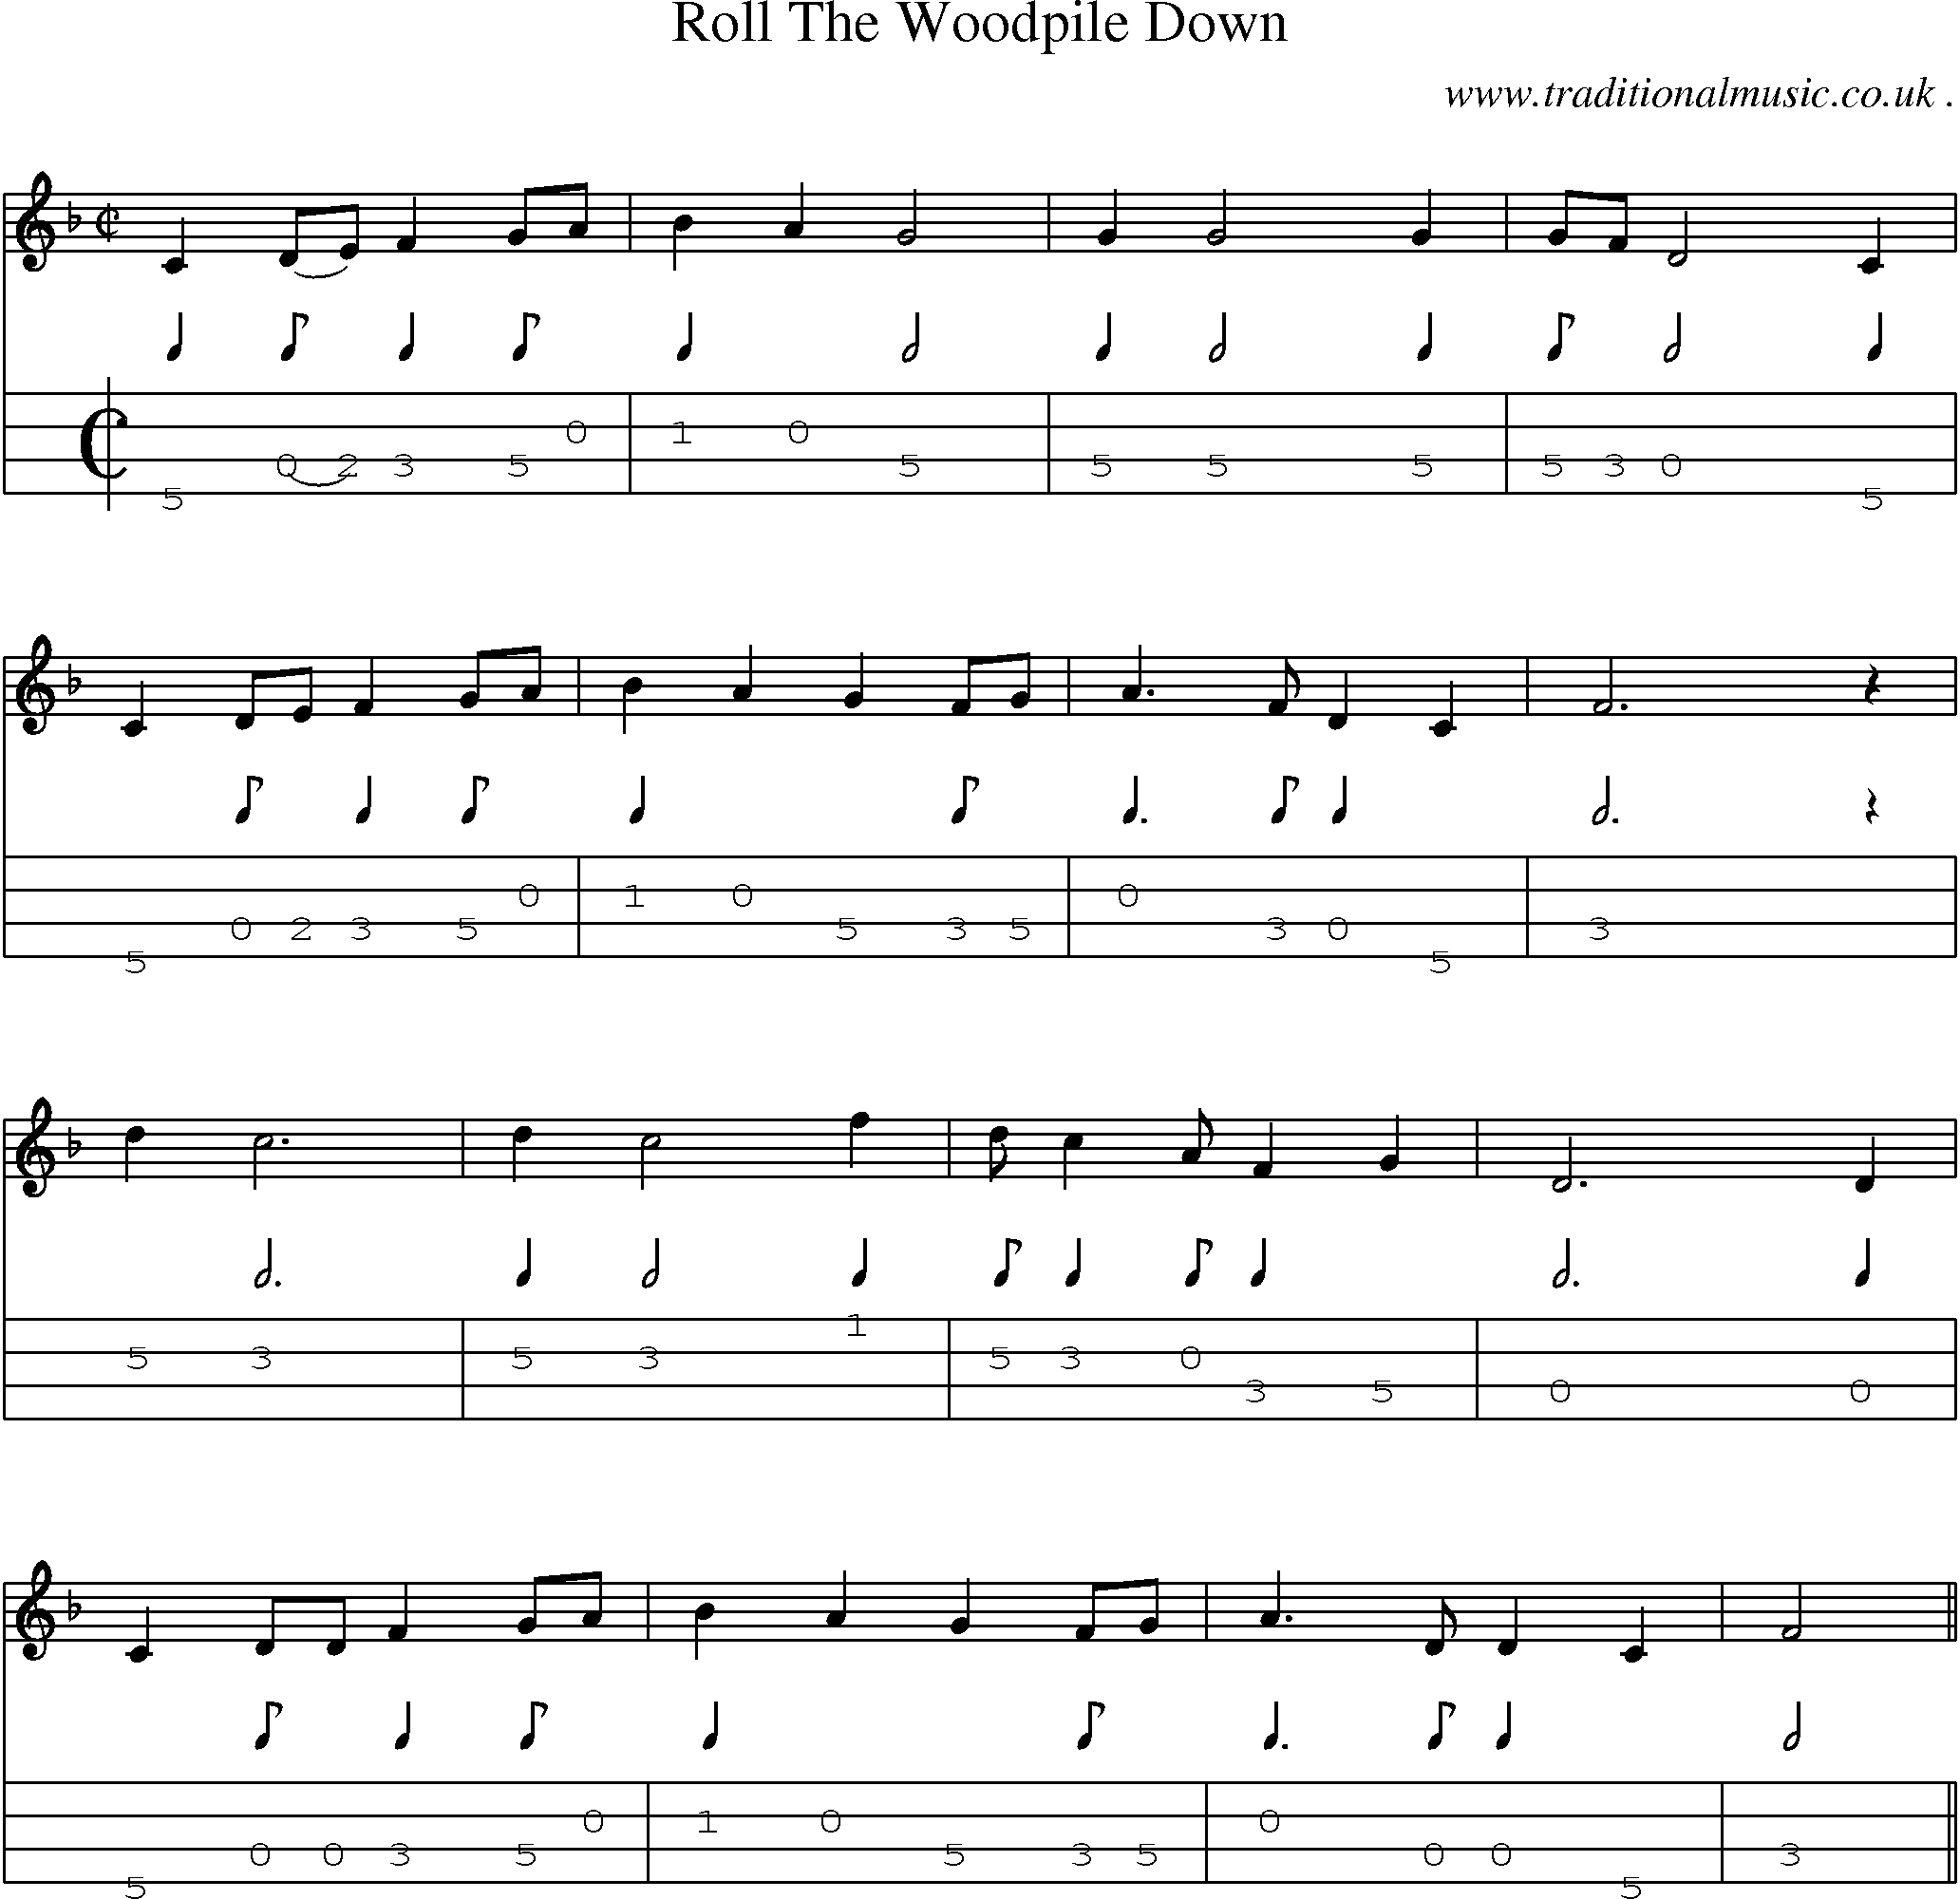 Sheet-Music and Mandolin Tabs for Roll The Woodpile Down